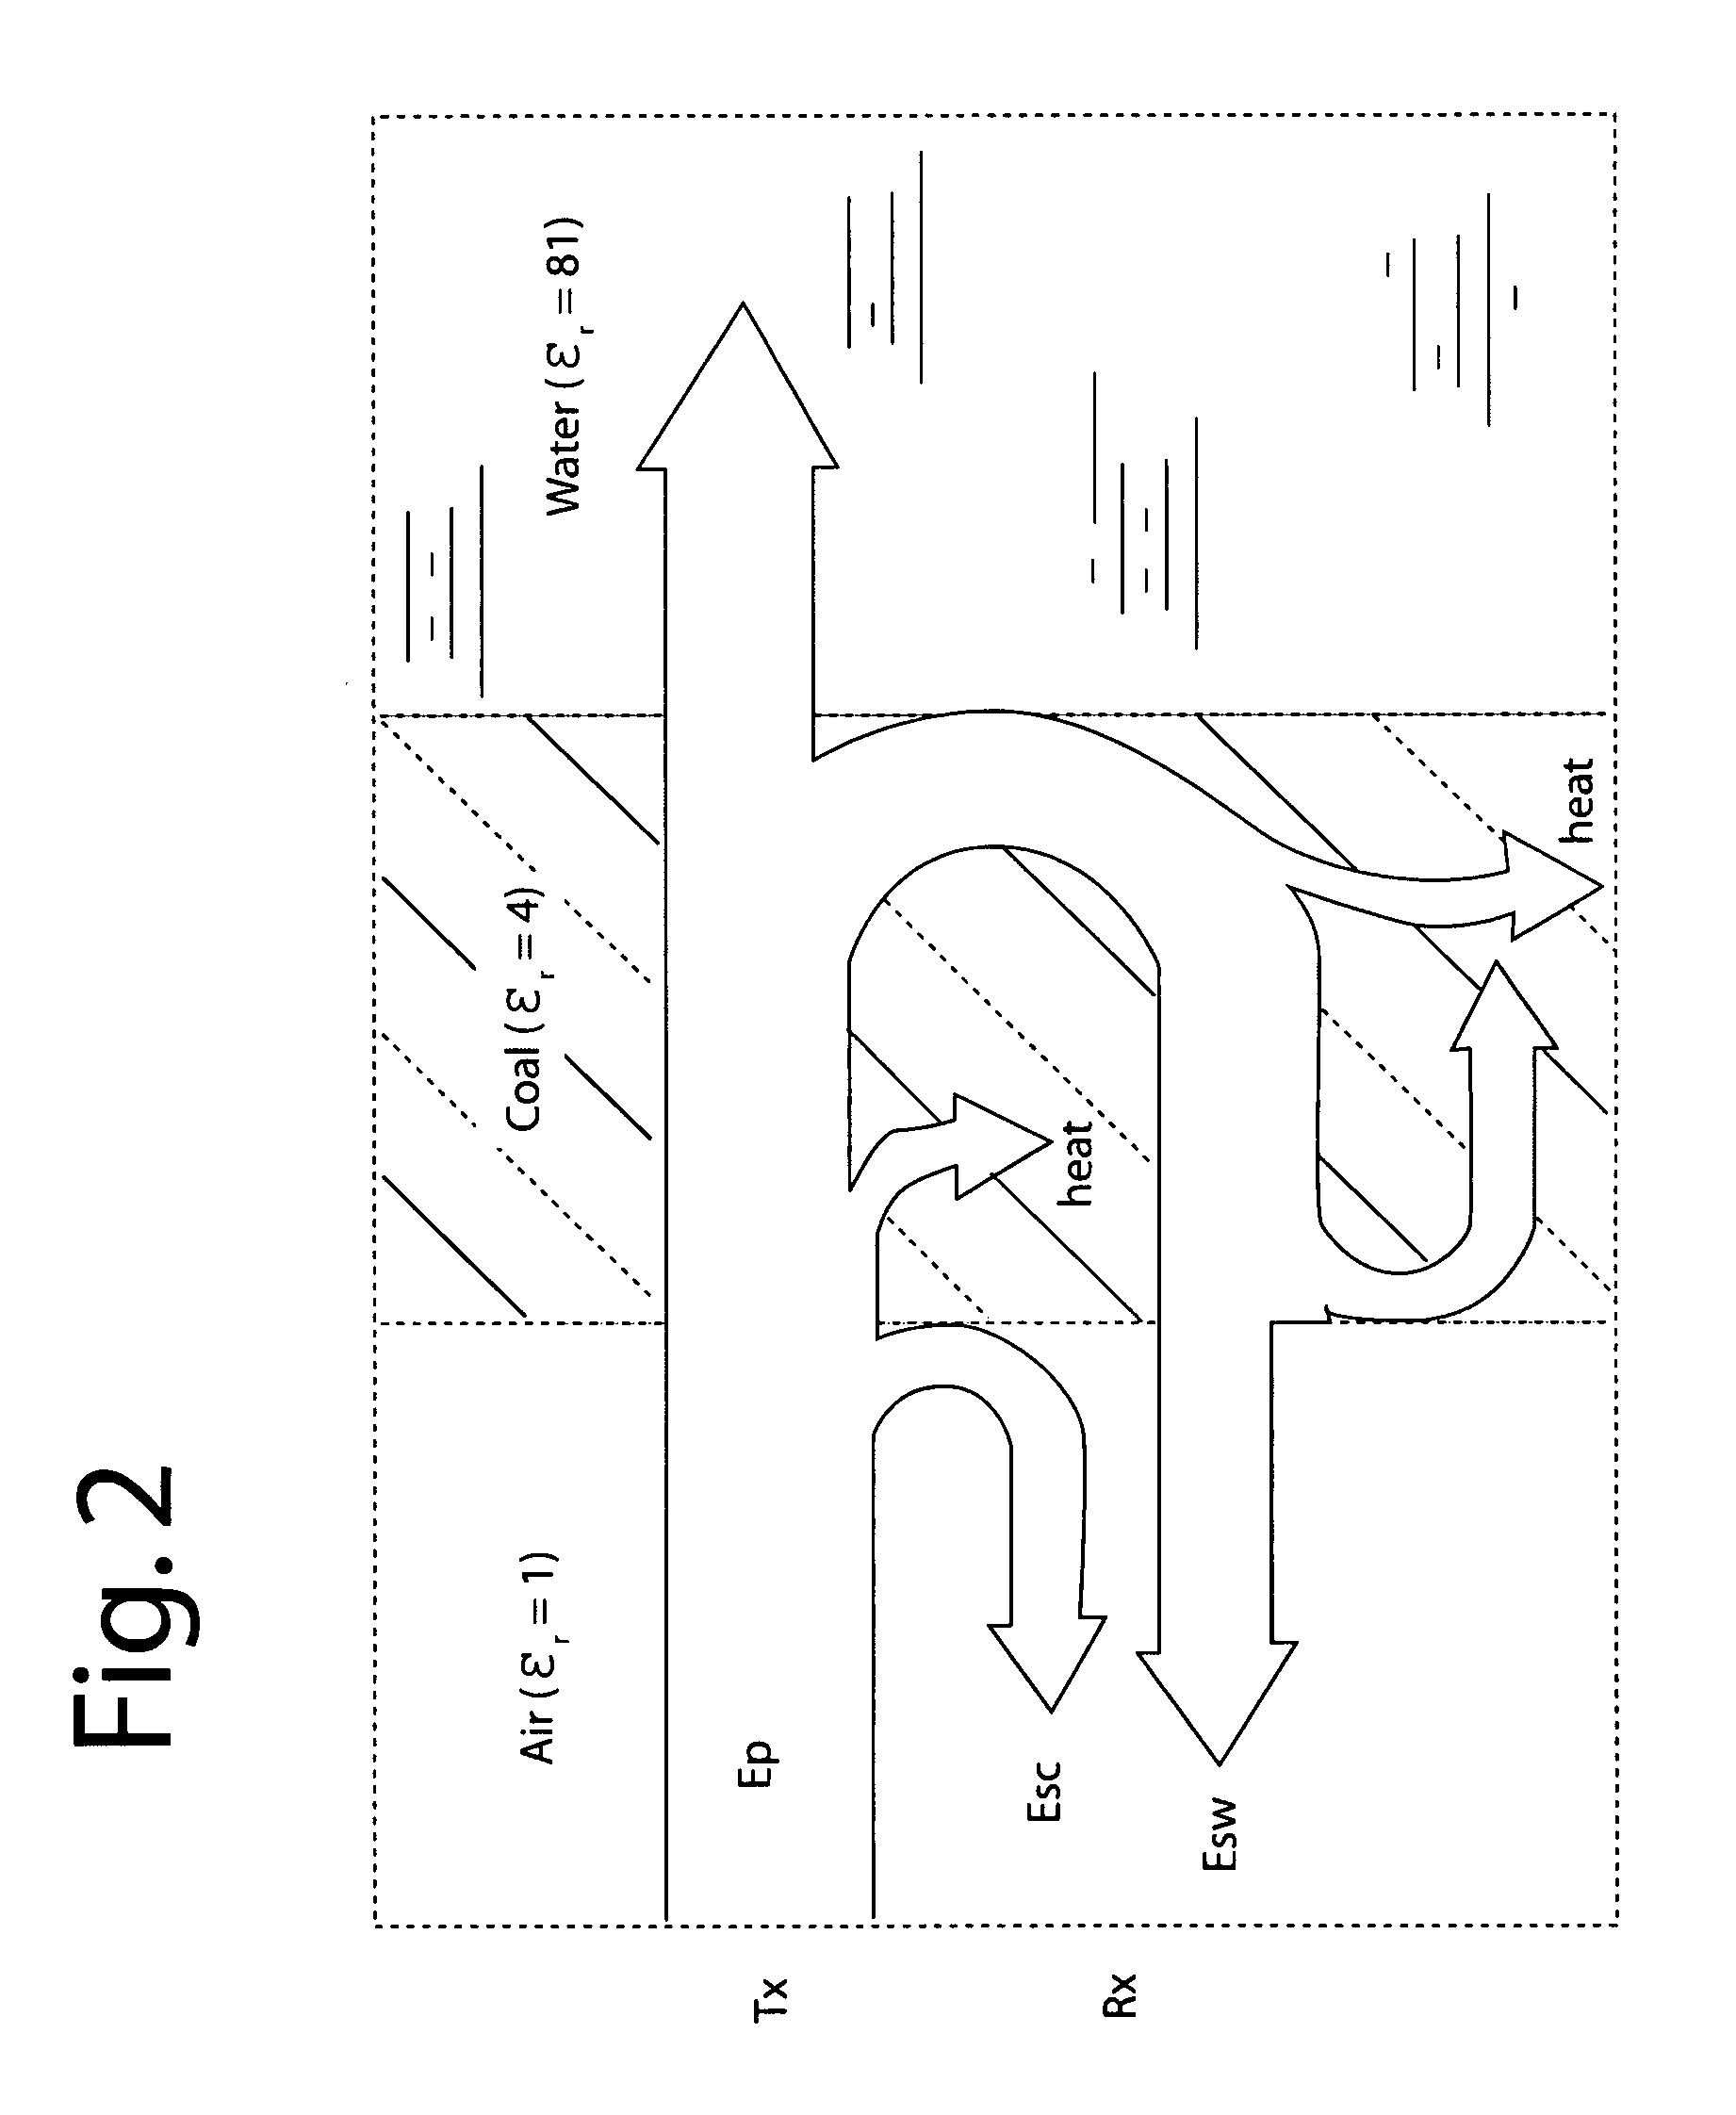 Earth-penetrating radar with inherent near-field rejection